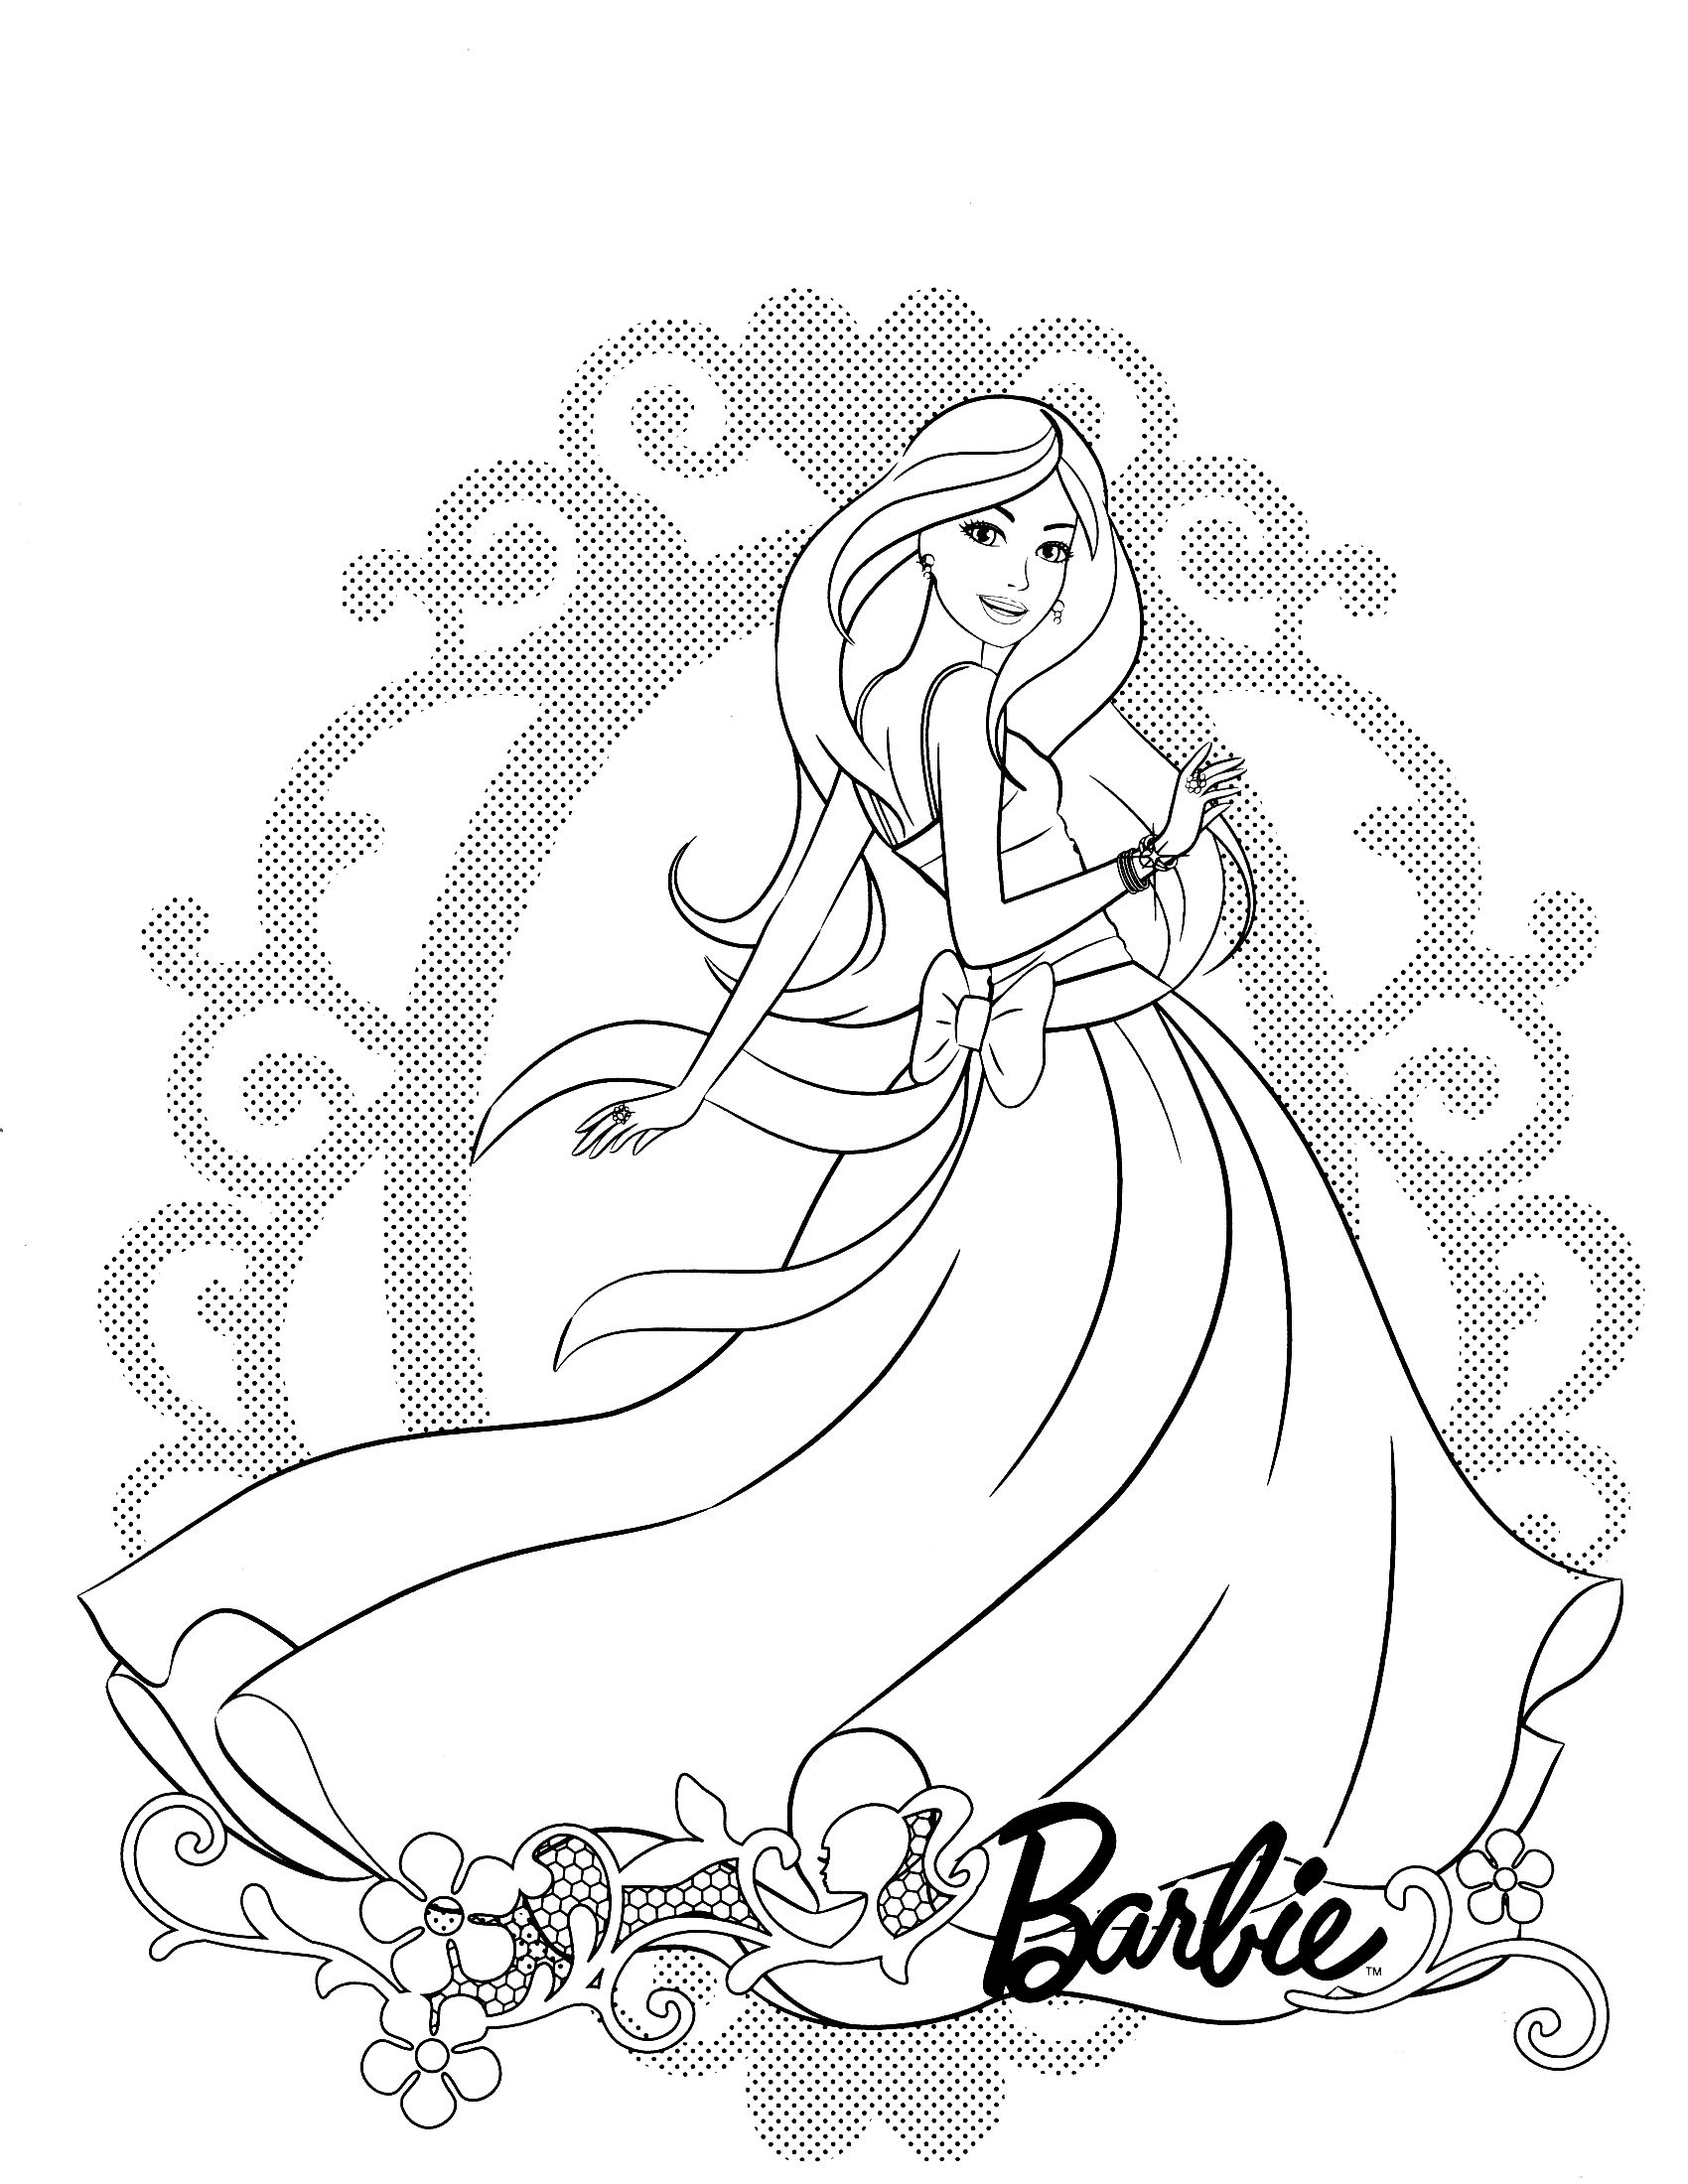 48-barbie-doll-house-colouring-pages-pics